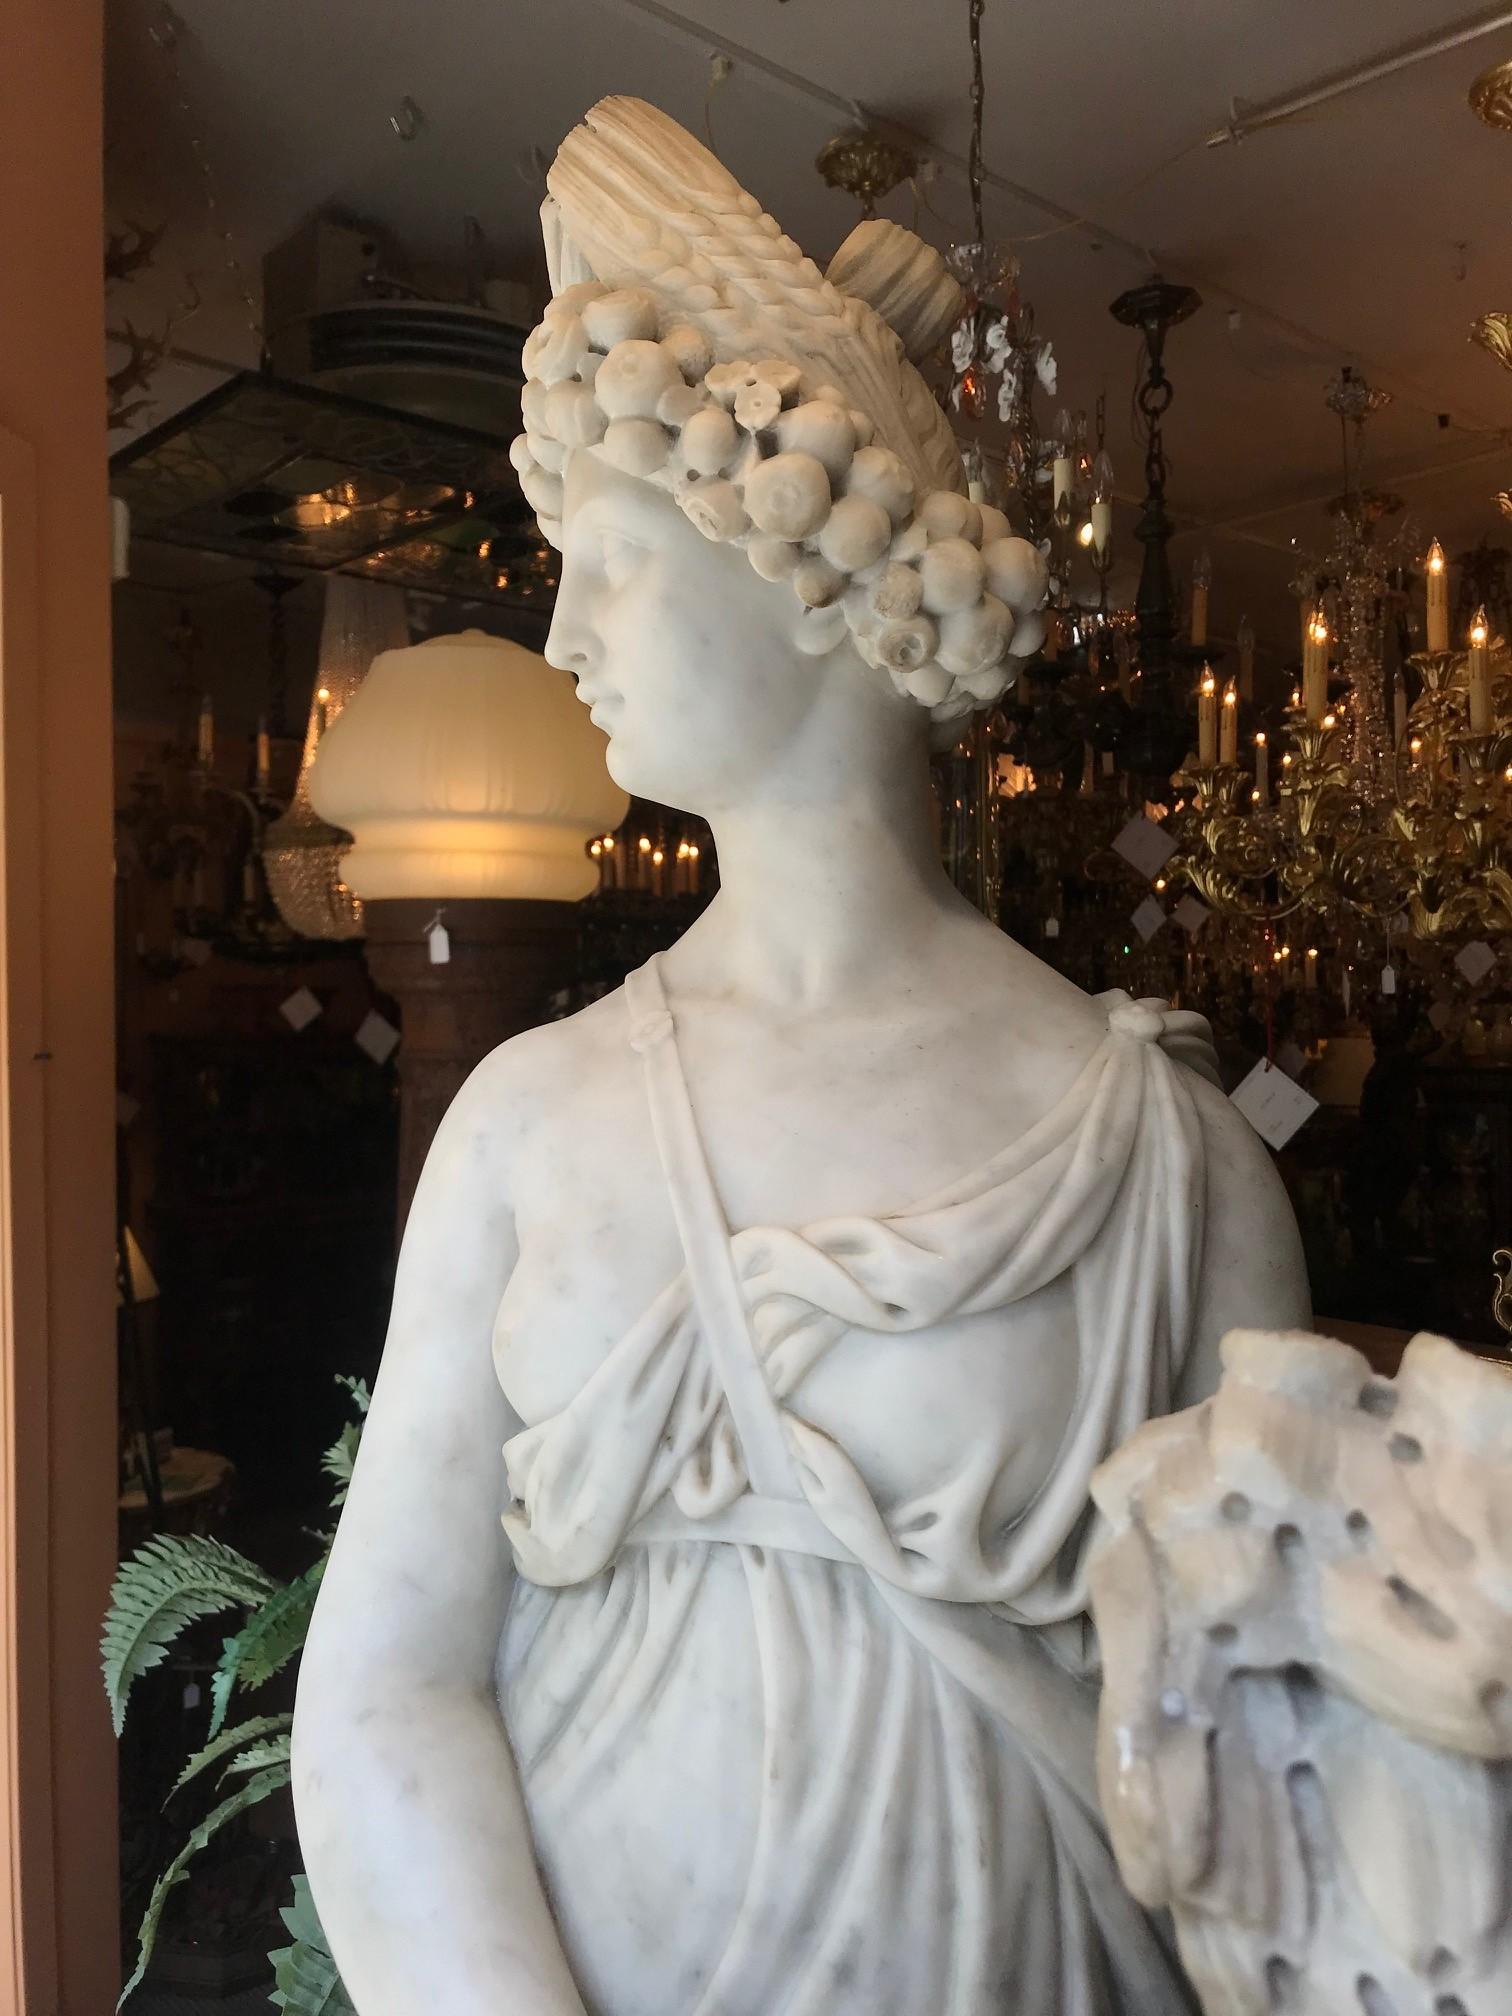 Near Life-Sized Italian White Marble Figure of Ceres, After the Antique 8